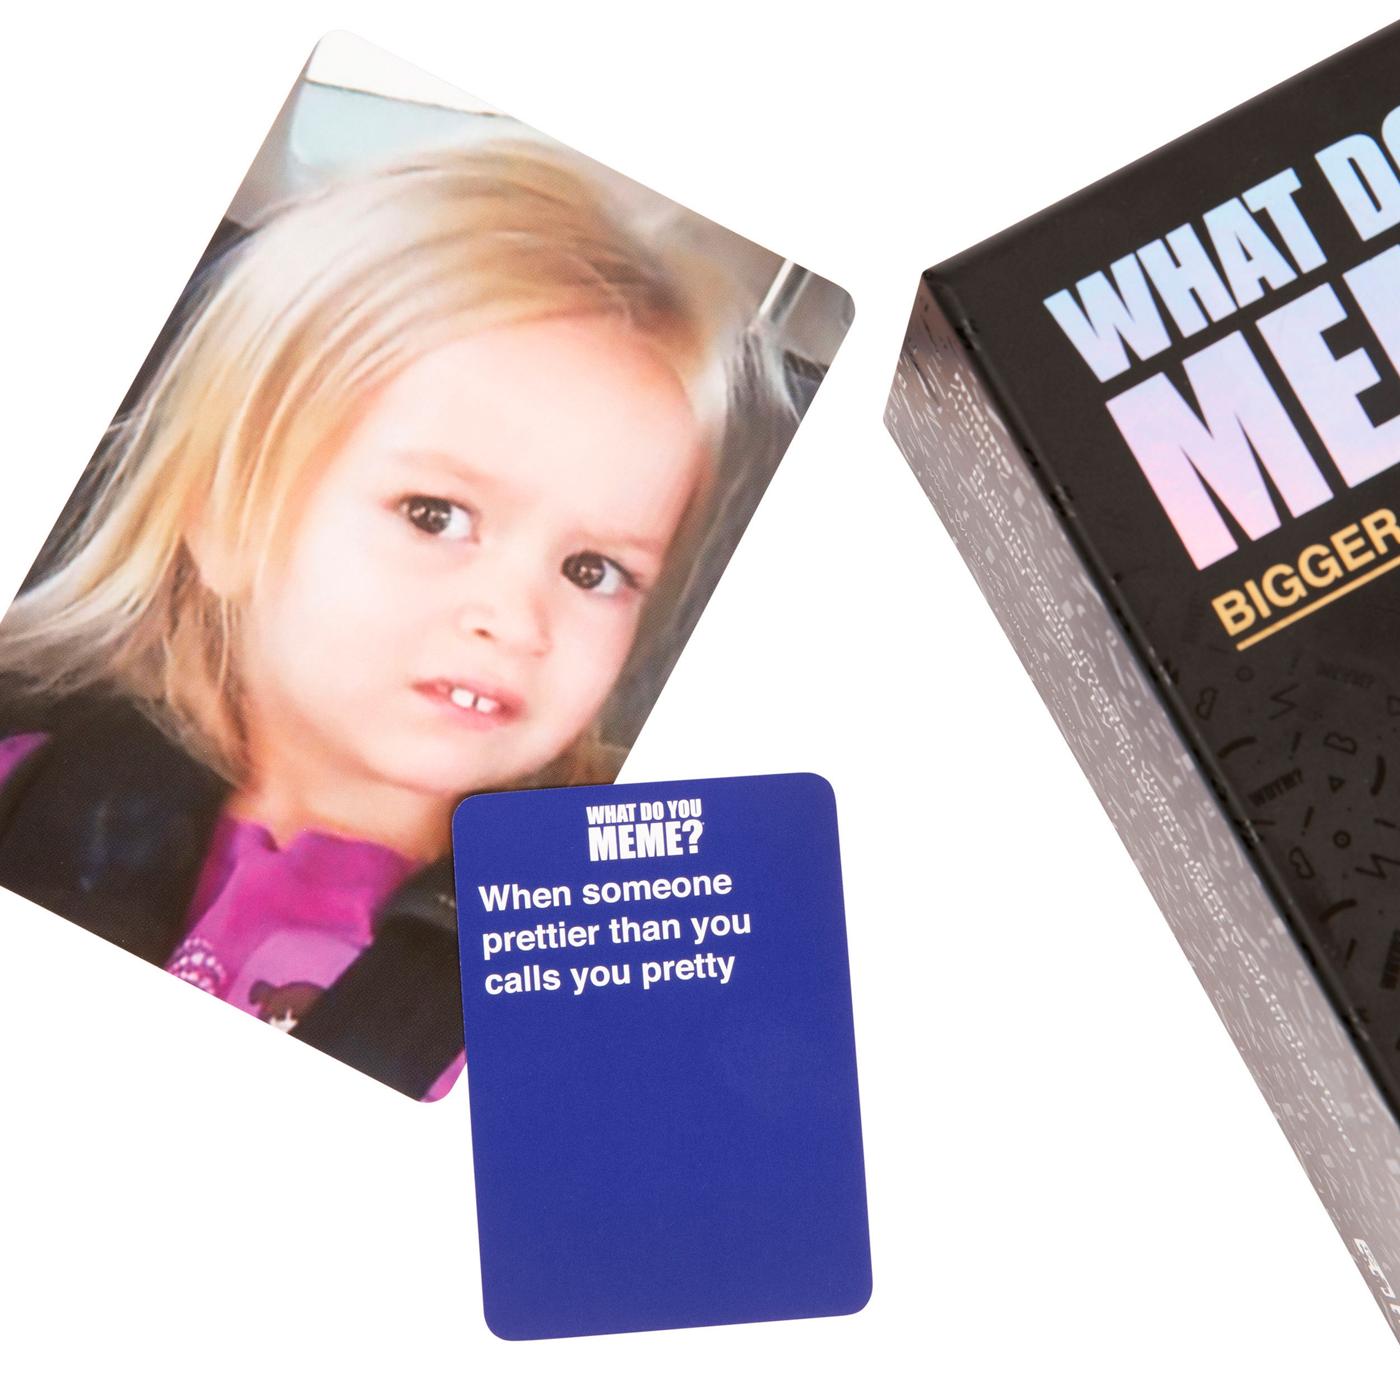 What Do You Meme?® Ultimate Adult Party Card Game for Meme-Lovers